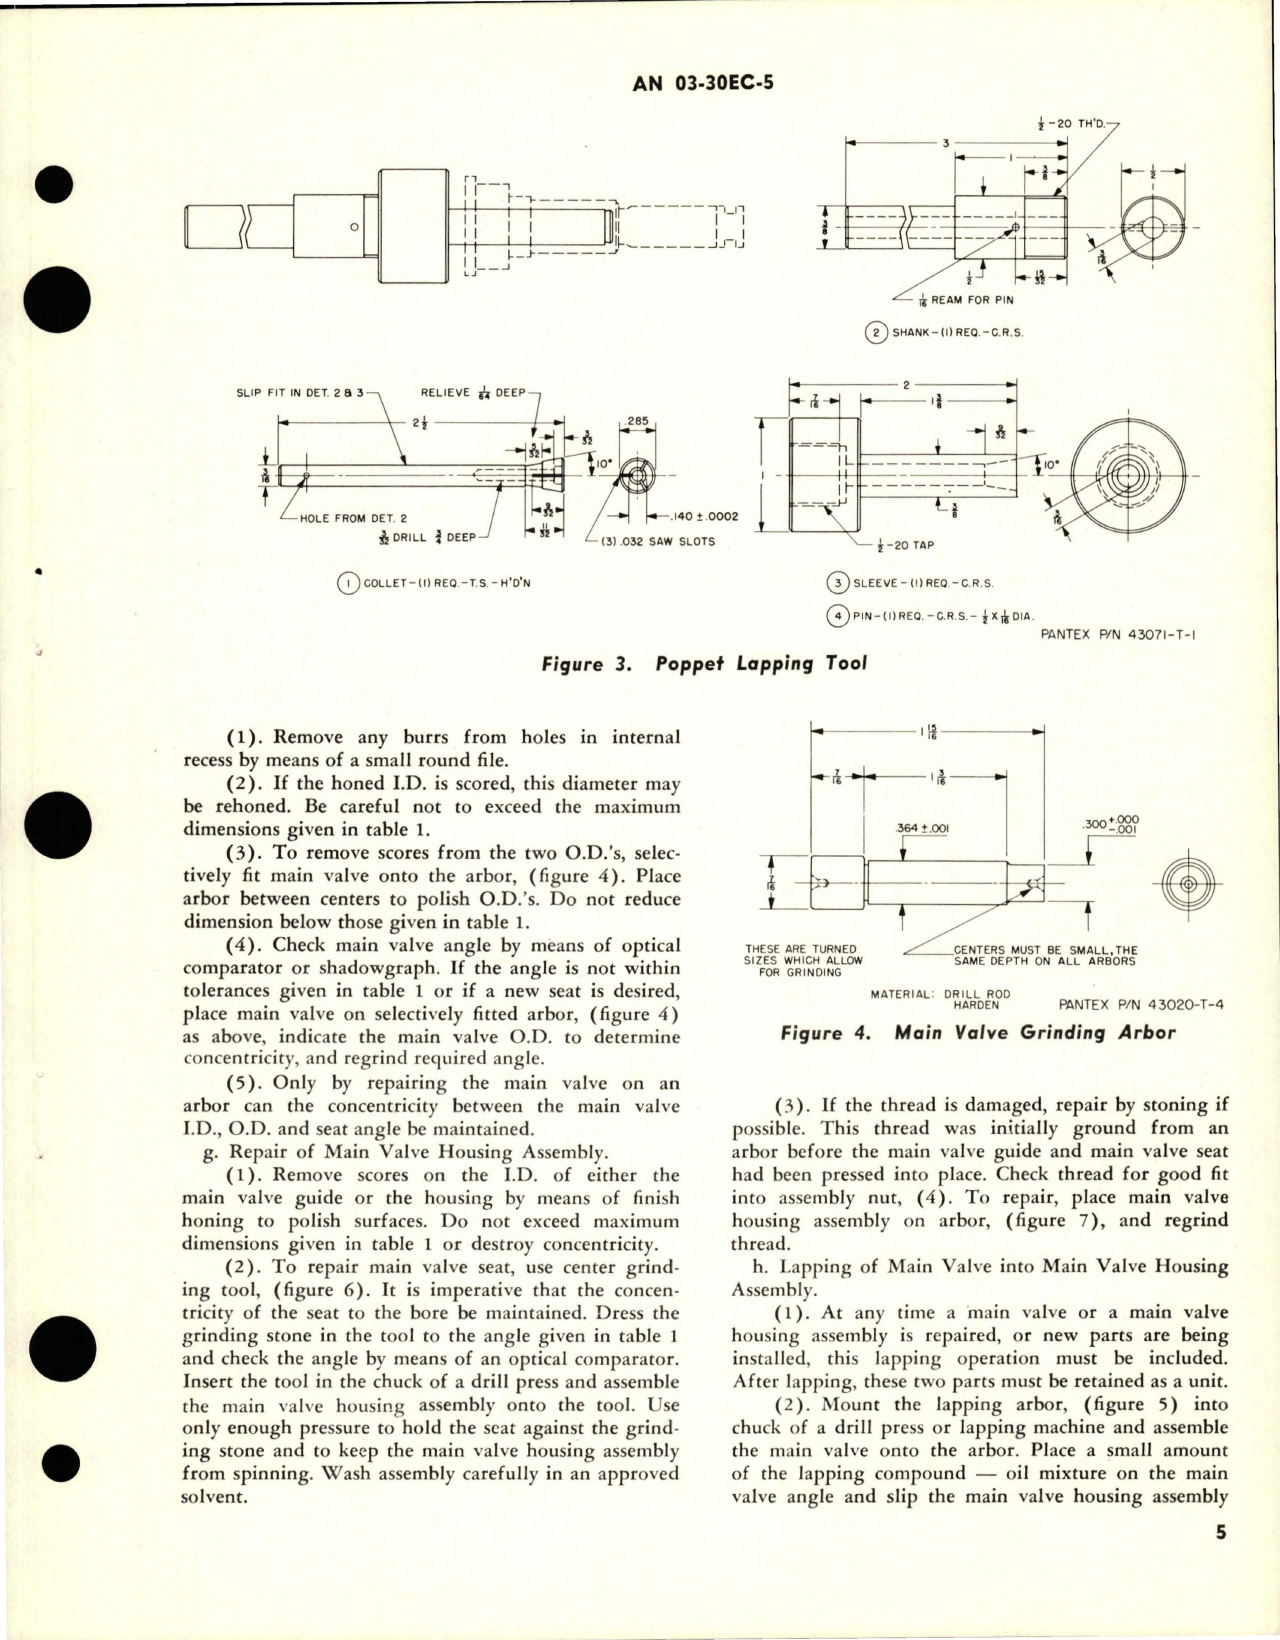 Sample page 5 from AirCorps Library document: Overhaul Instructions with Parts Breakdown for Hydraulic Pressure Relief Valve - HPLV-A2